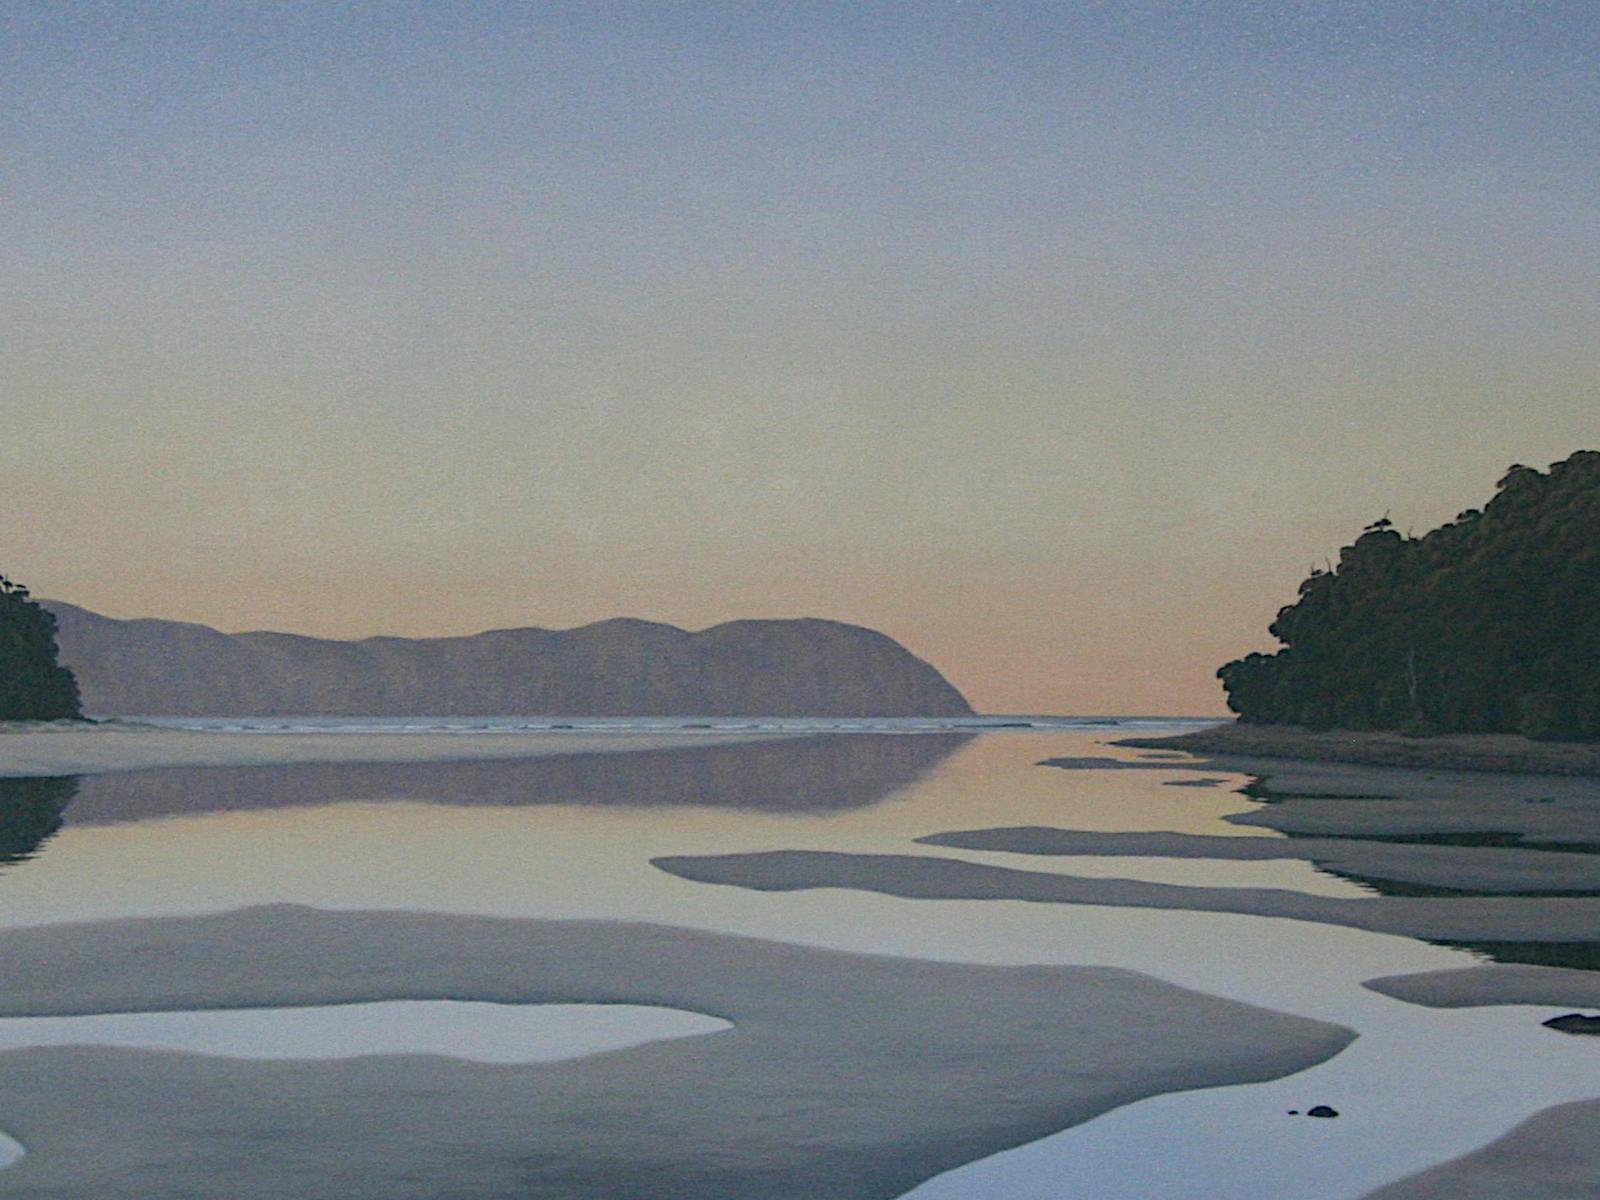 Richard Stanley - On Country, Cloudy Bay Low Tide, Bruny Island